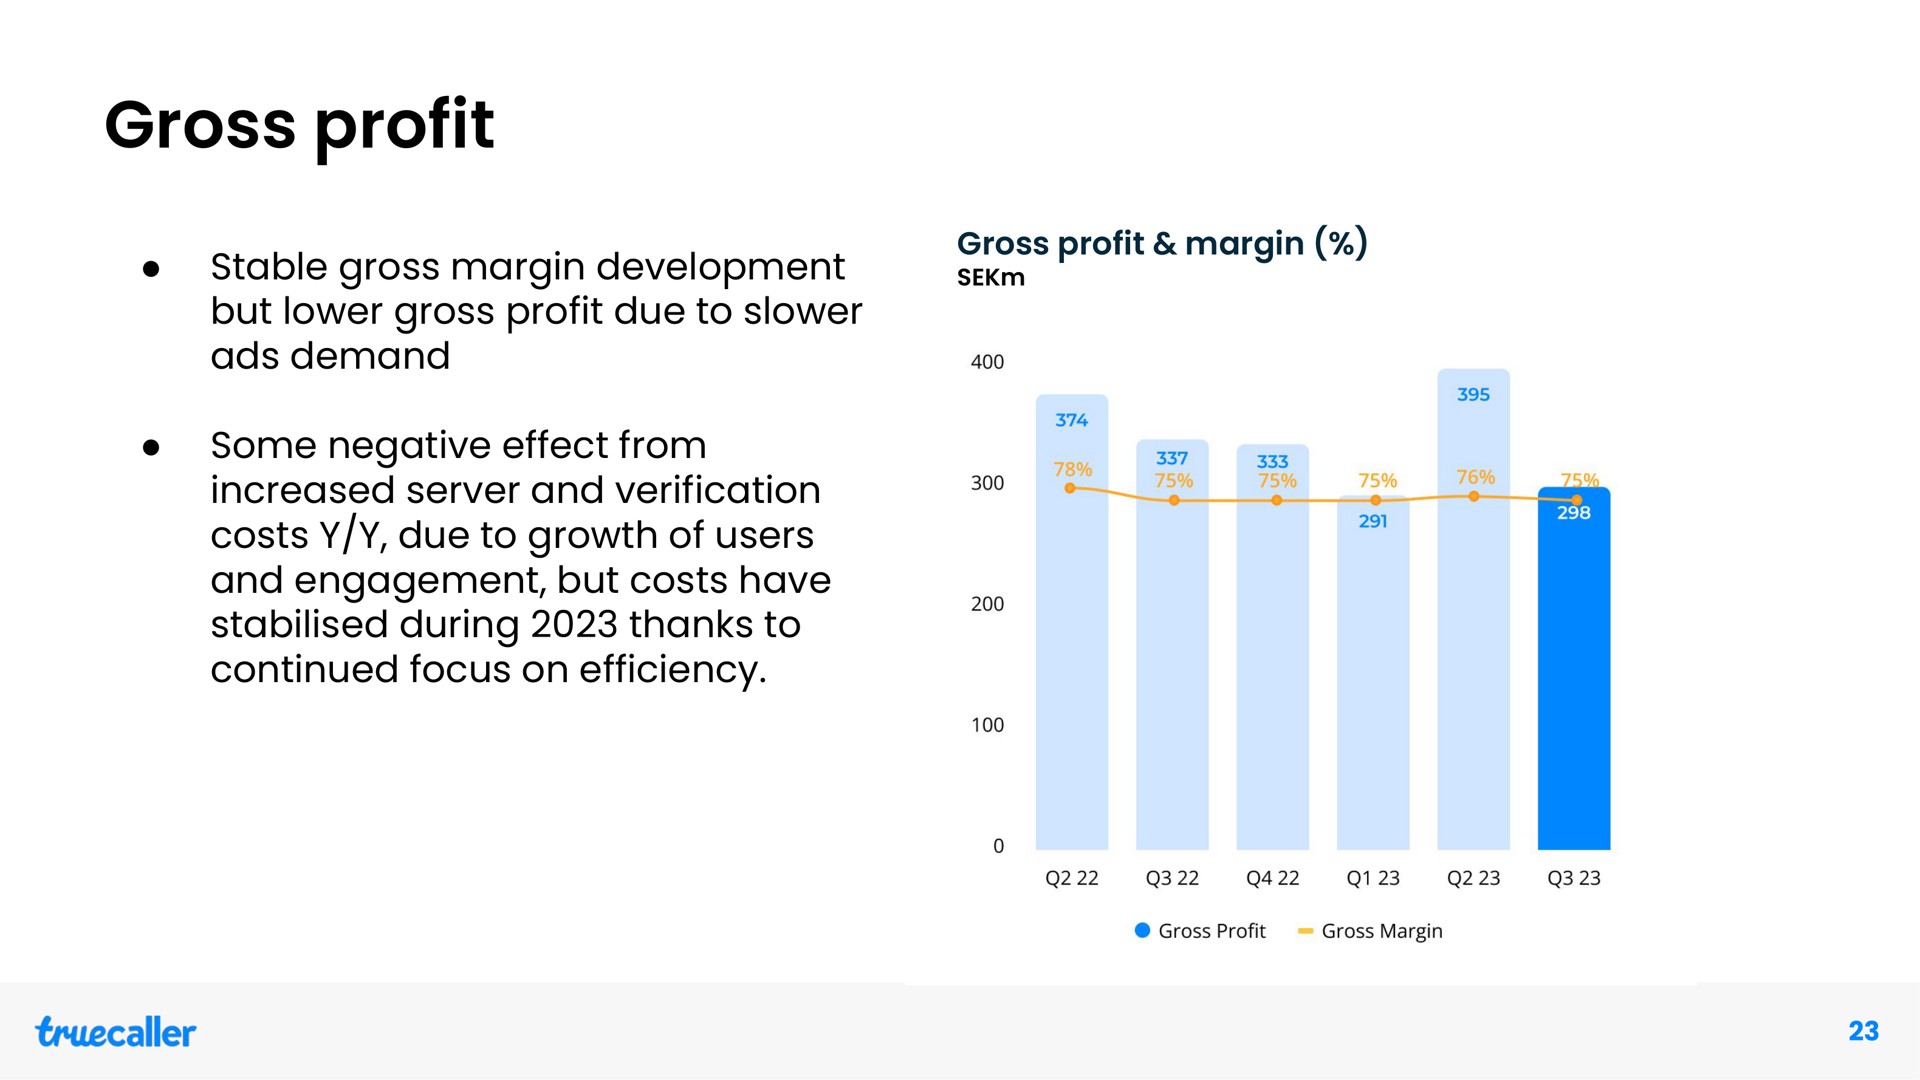 gross profit stable gross margin development but lower gross profit due to ads demand some negative effect from increased server and verification costs due to growth of users and engagement but costs have during thanks to continued focus on efficiency gross profit margin | Truecaller